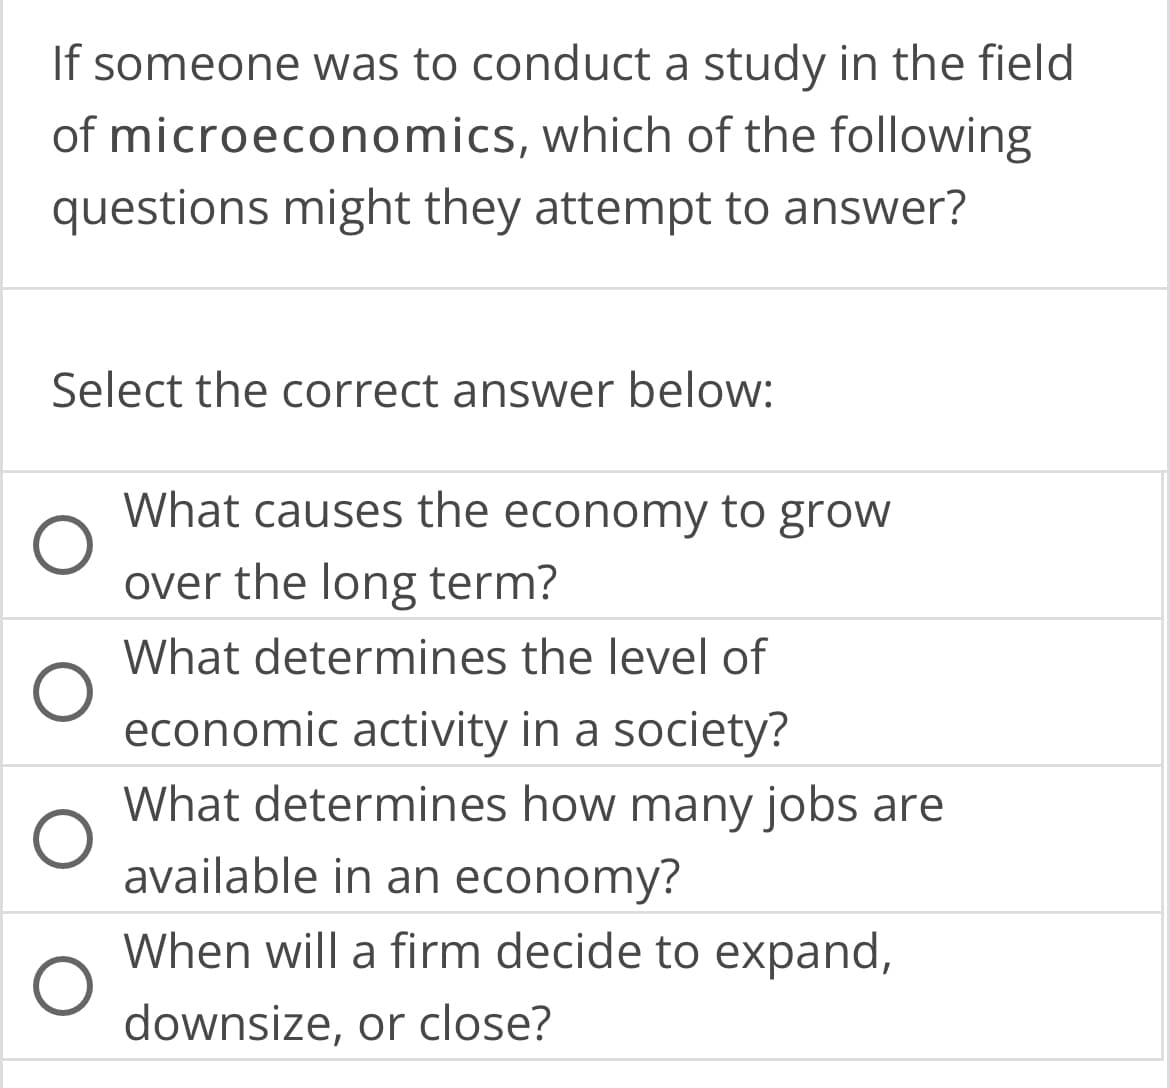 If someone was to conduct a study in the field
of microeconomics, which of the following
questions might they attempt to answer?
Select the correct answer below:
O
What causes the economy to grow
over the long term?
What determines the level of
economic activity in a society?
What determines how many jobs are
available in an economy?
When will a firm decide to expand,
downsize, or close?